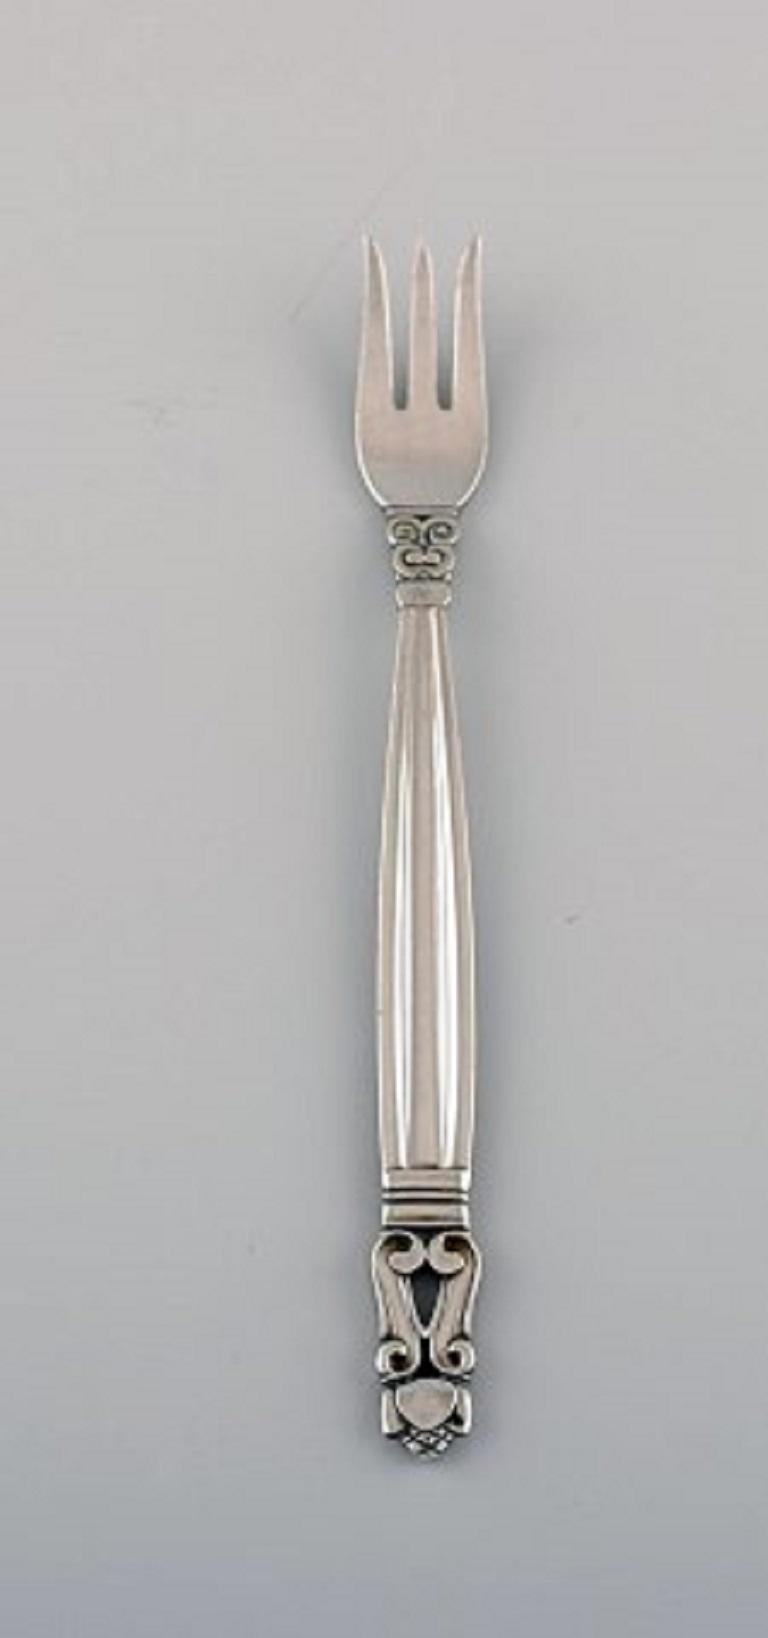 Eight Georg Jensen Acorn oyster forks in sterling silver.
Measures: Length 14.5 cm.
In very good condition.
Stamped.
Our skilled Georg Jensen silversmith / jeweler can polish all silver and gold so that it looks like new. The price is very